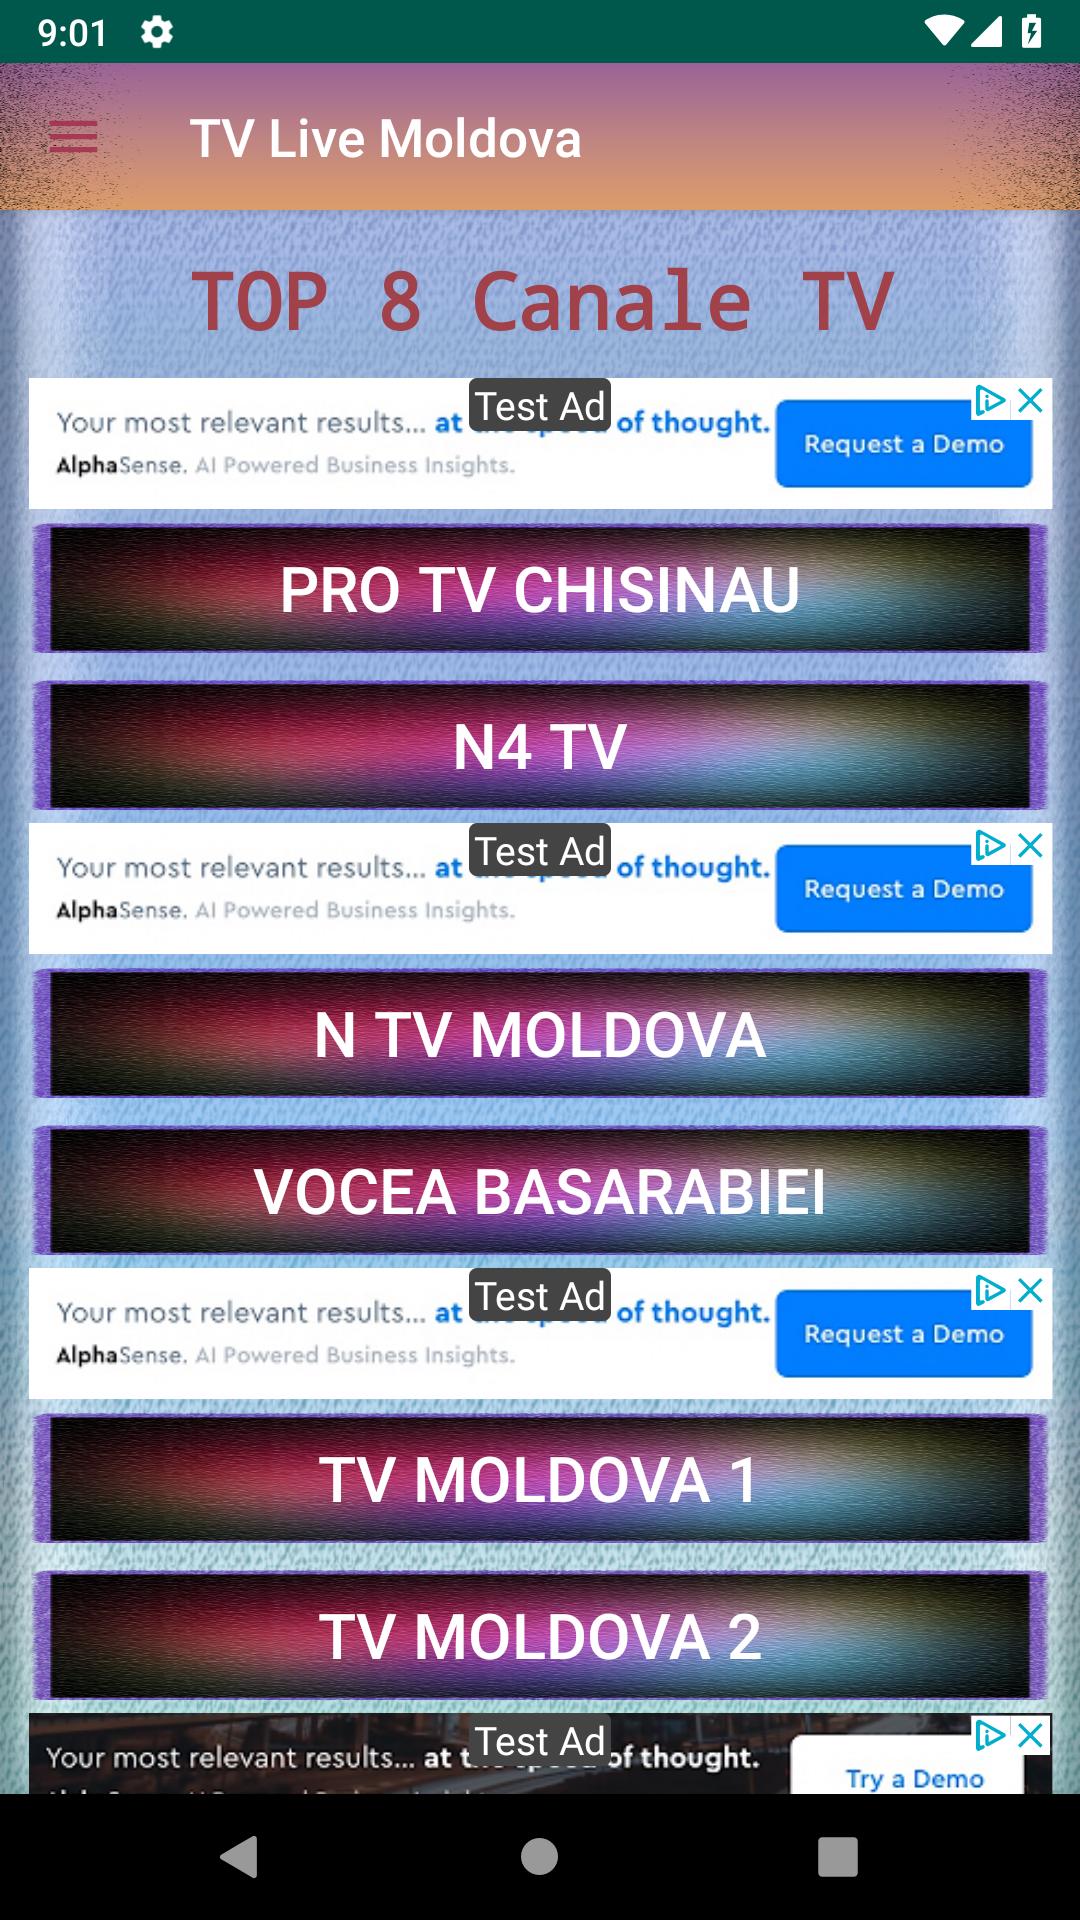 TV Live Moldova for Android - APK Download